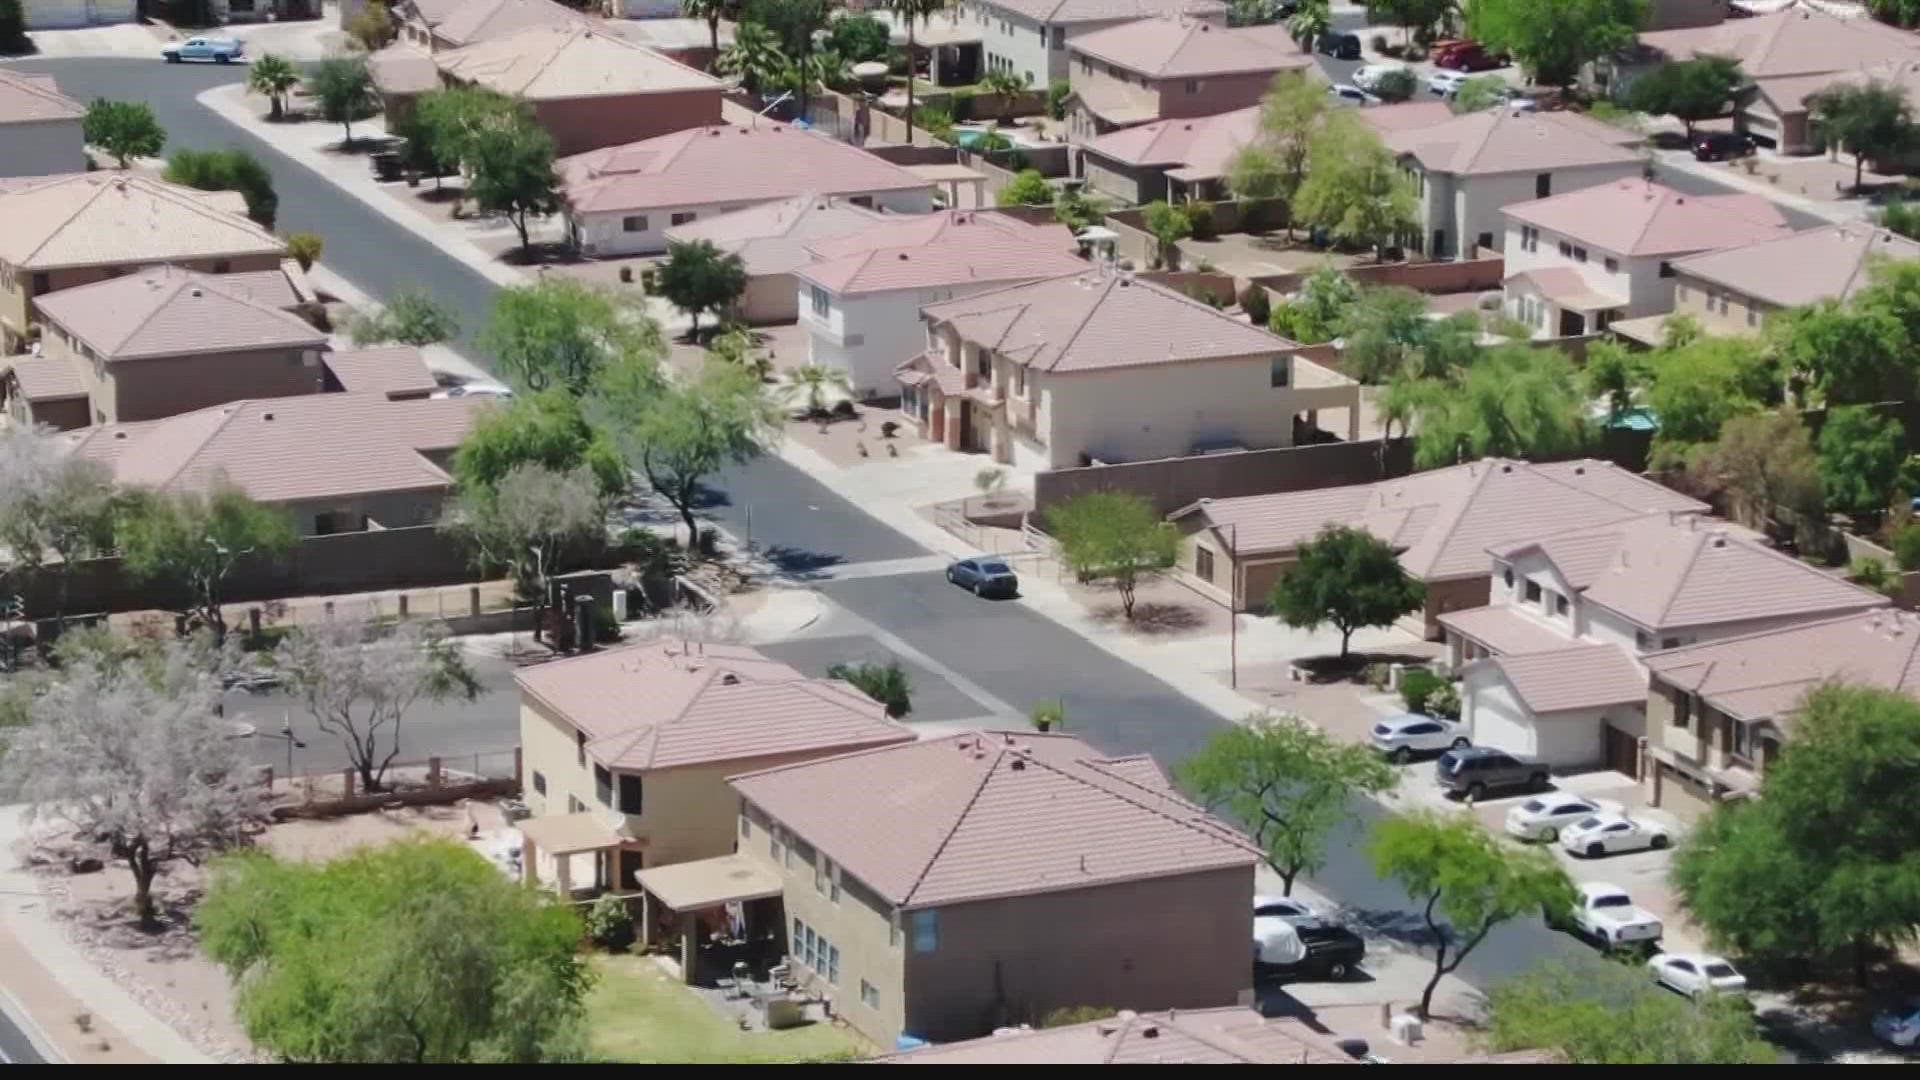 We've heard the Phoenix metro area is growing rapidly, but what do the numbers say?